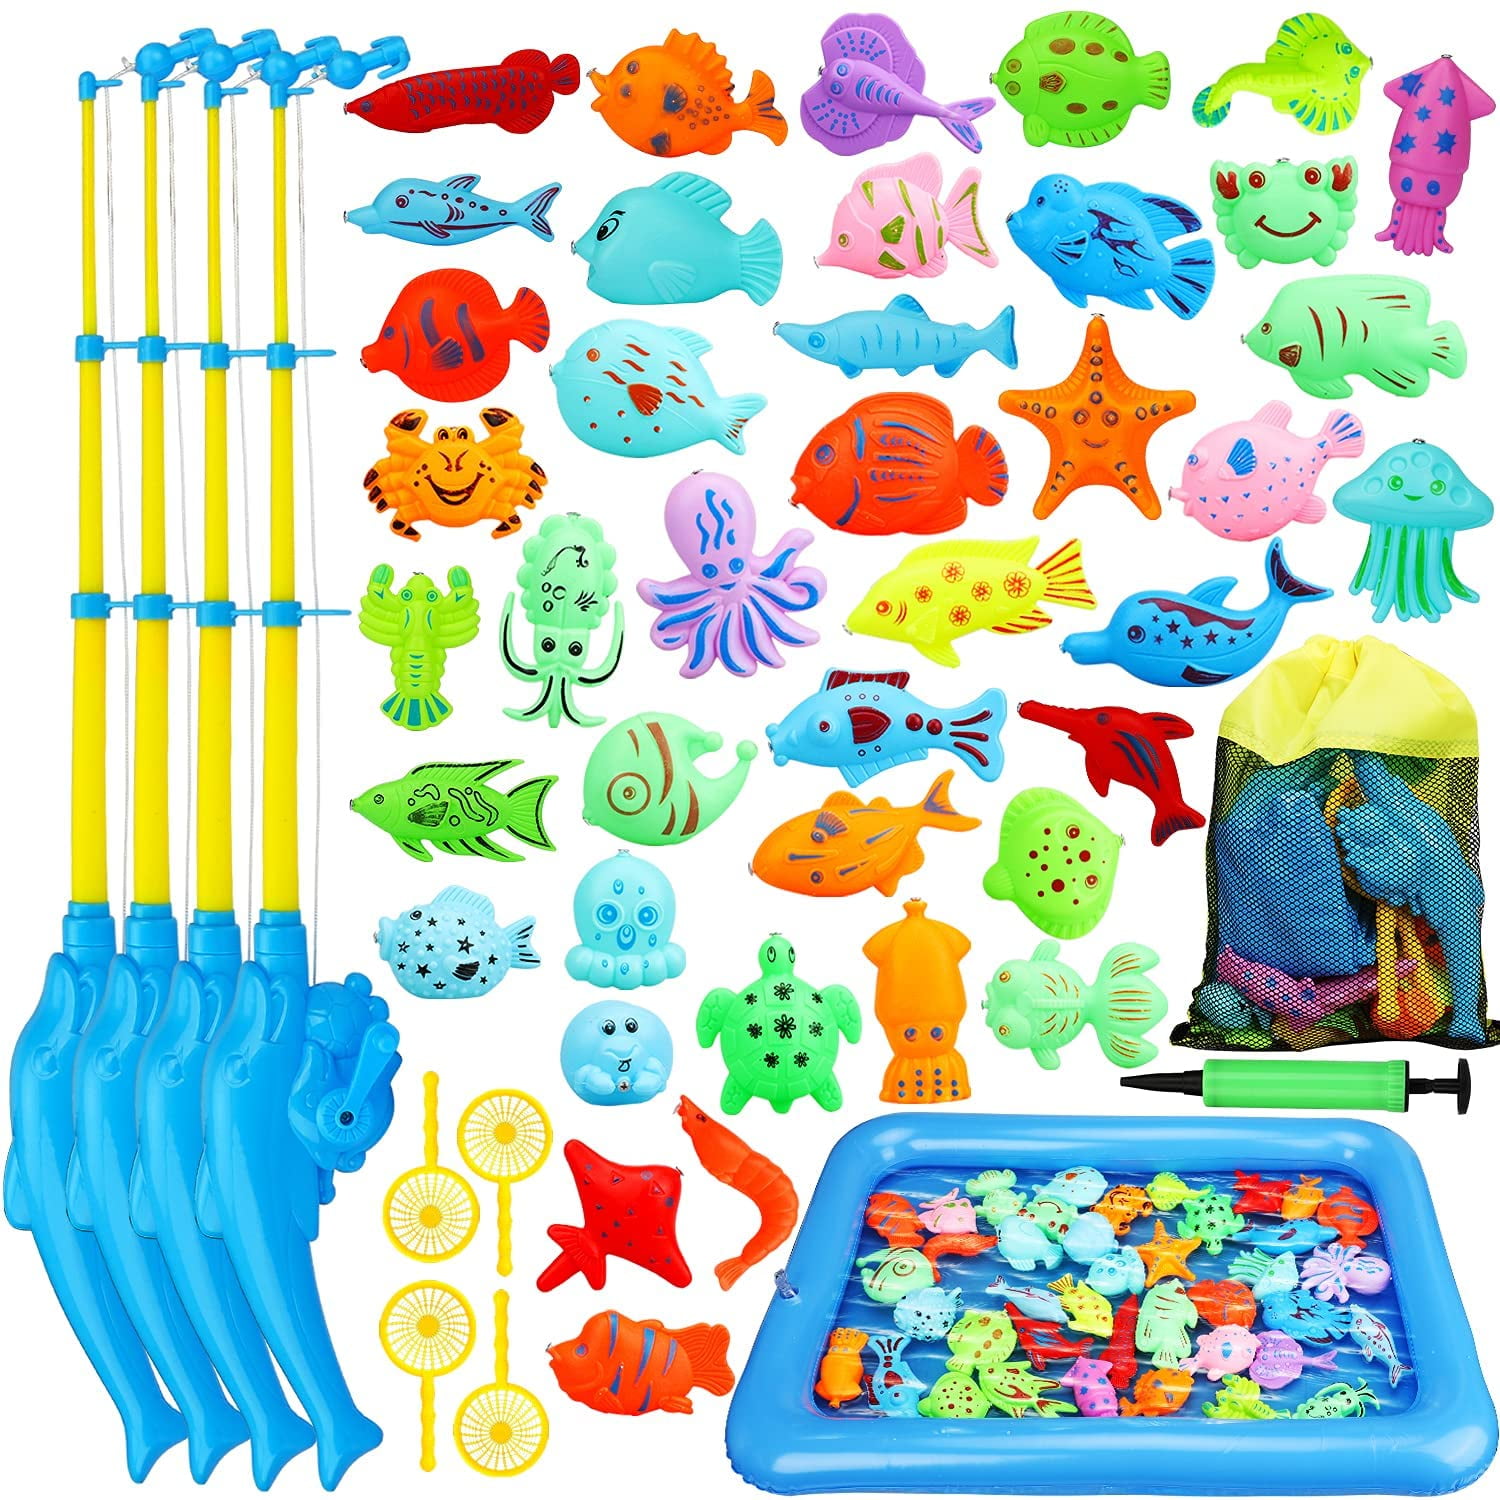 TOY Life Magnetic Fishing Game for Kids with 4 Fishing Pole, Pool